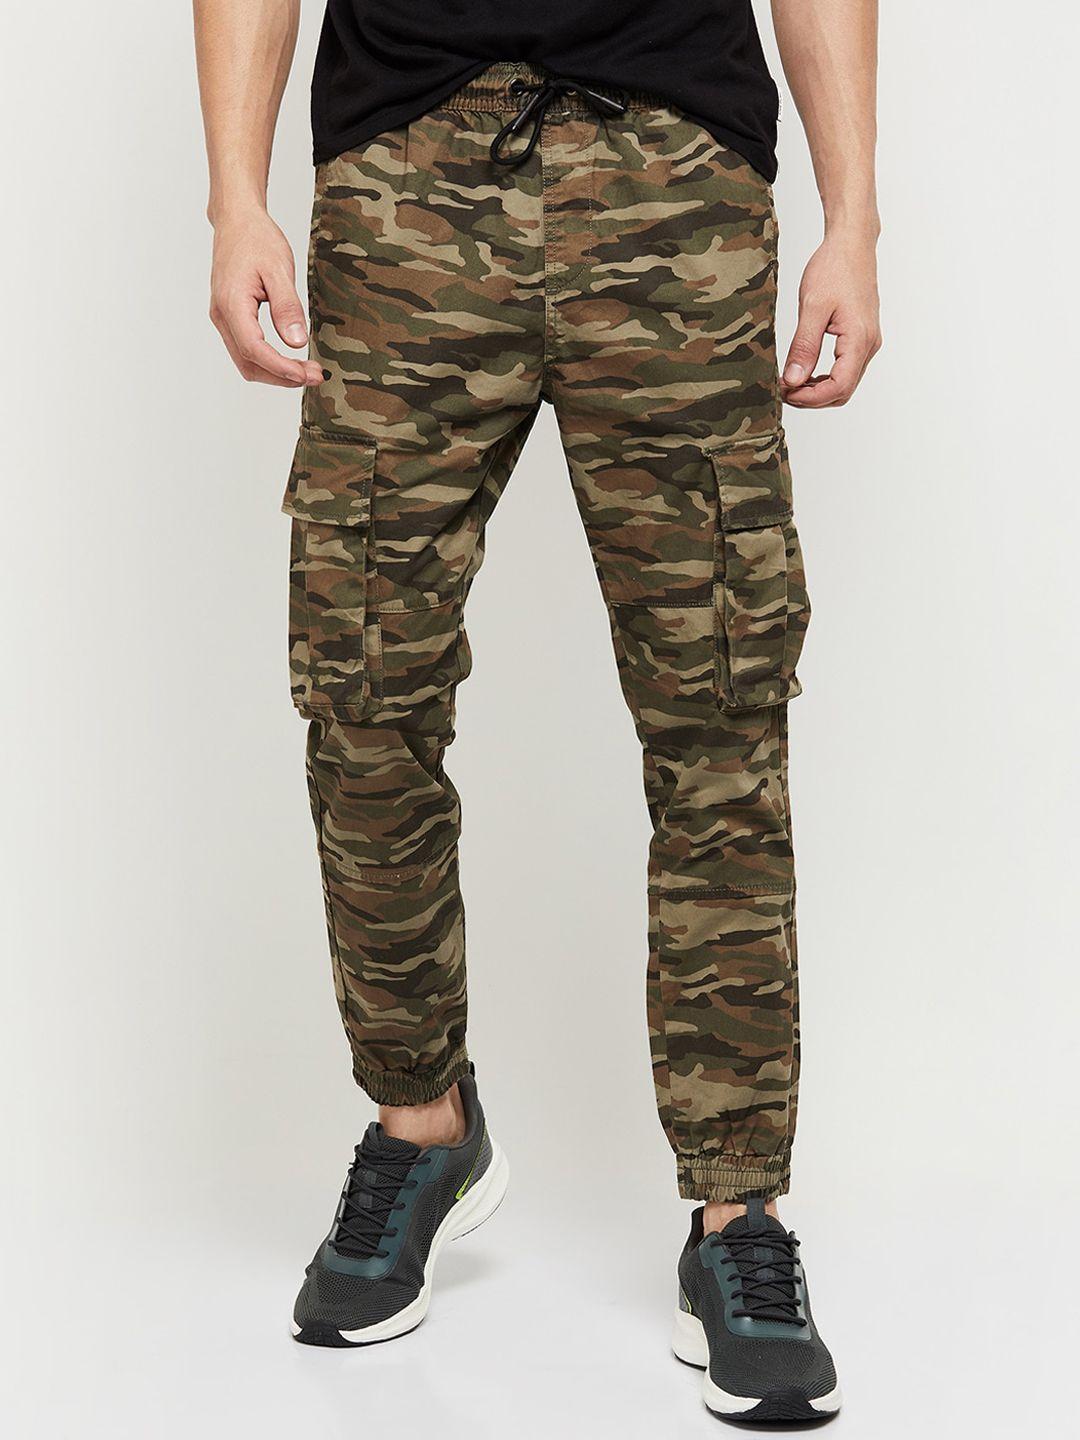 max men olive green camouflage printed joggers trousers